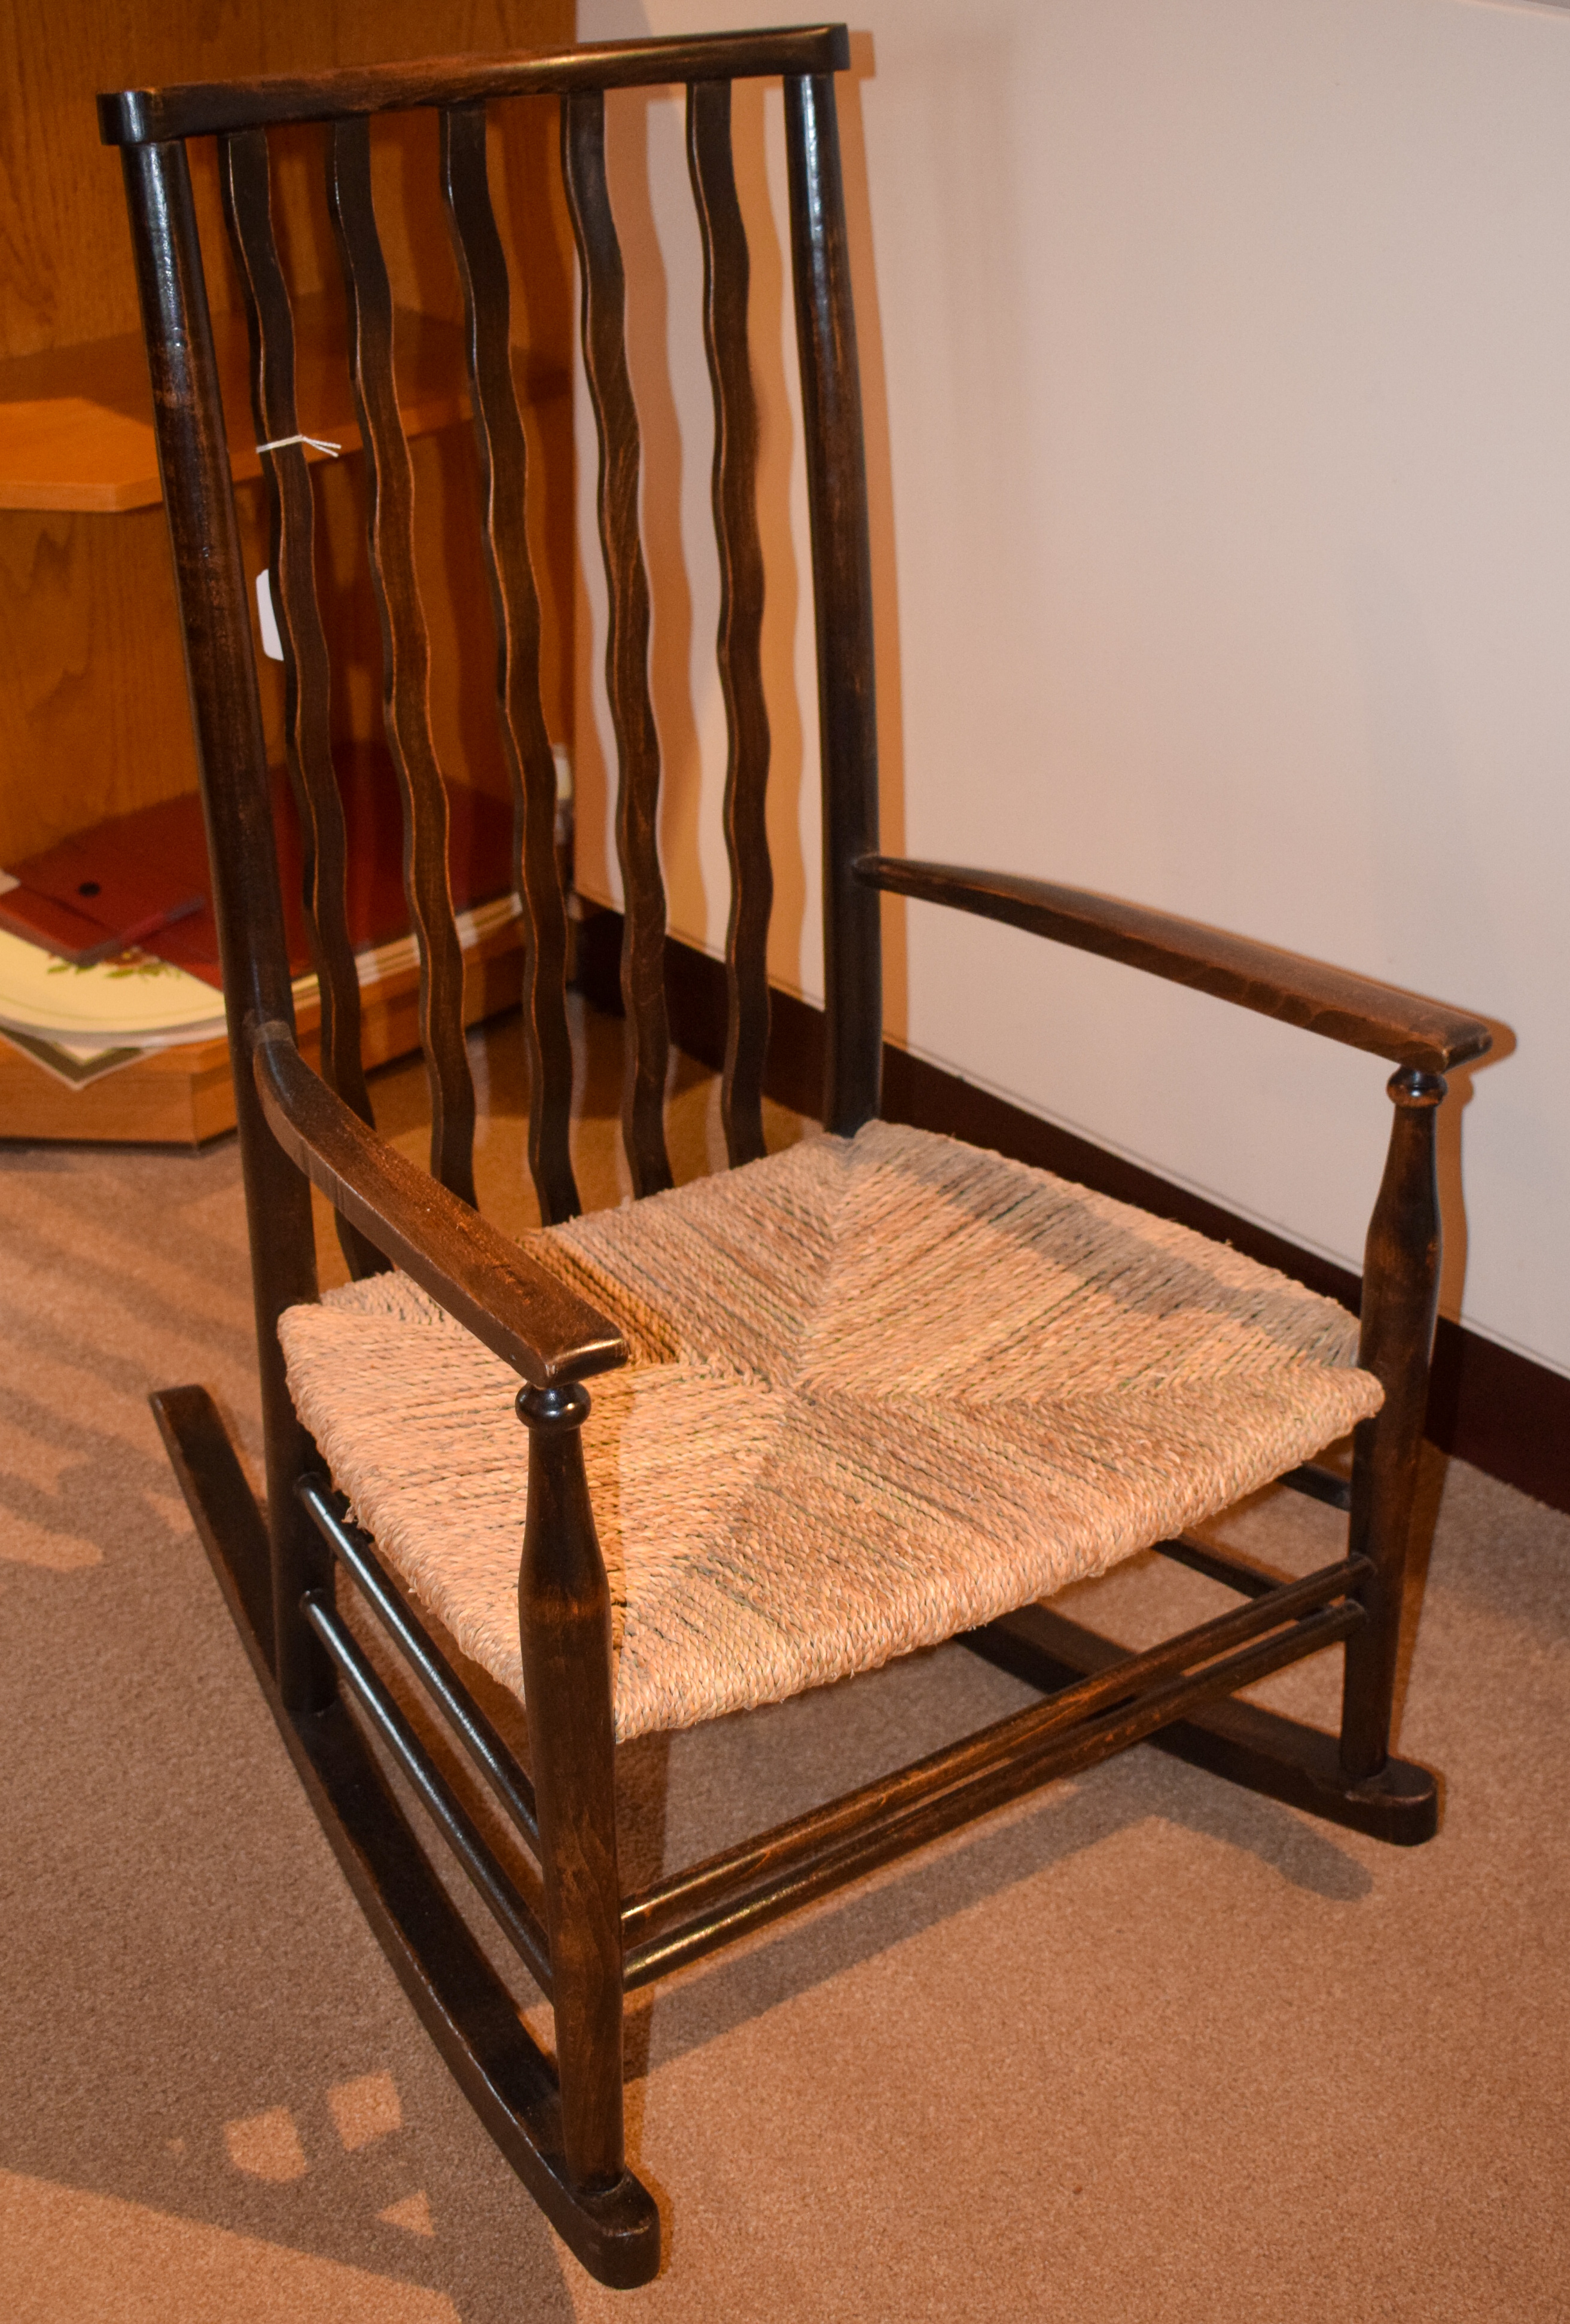 AN ANTIQUE OAK CHILDS ROCKING CHAIR, formed with thatched seat. 82 cm x 49 cm.